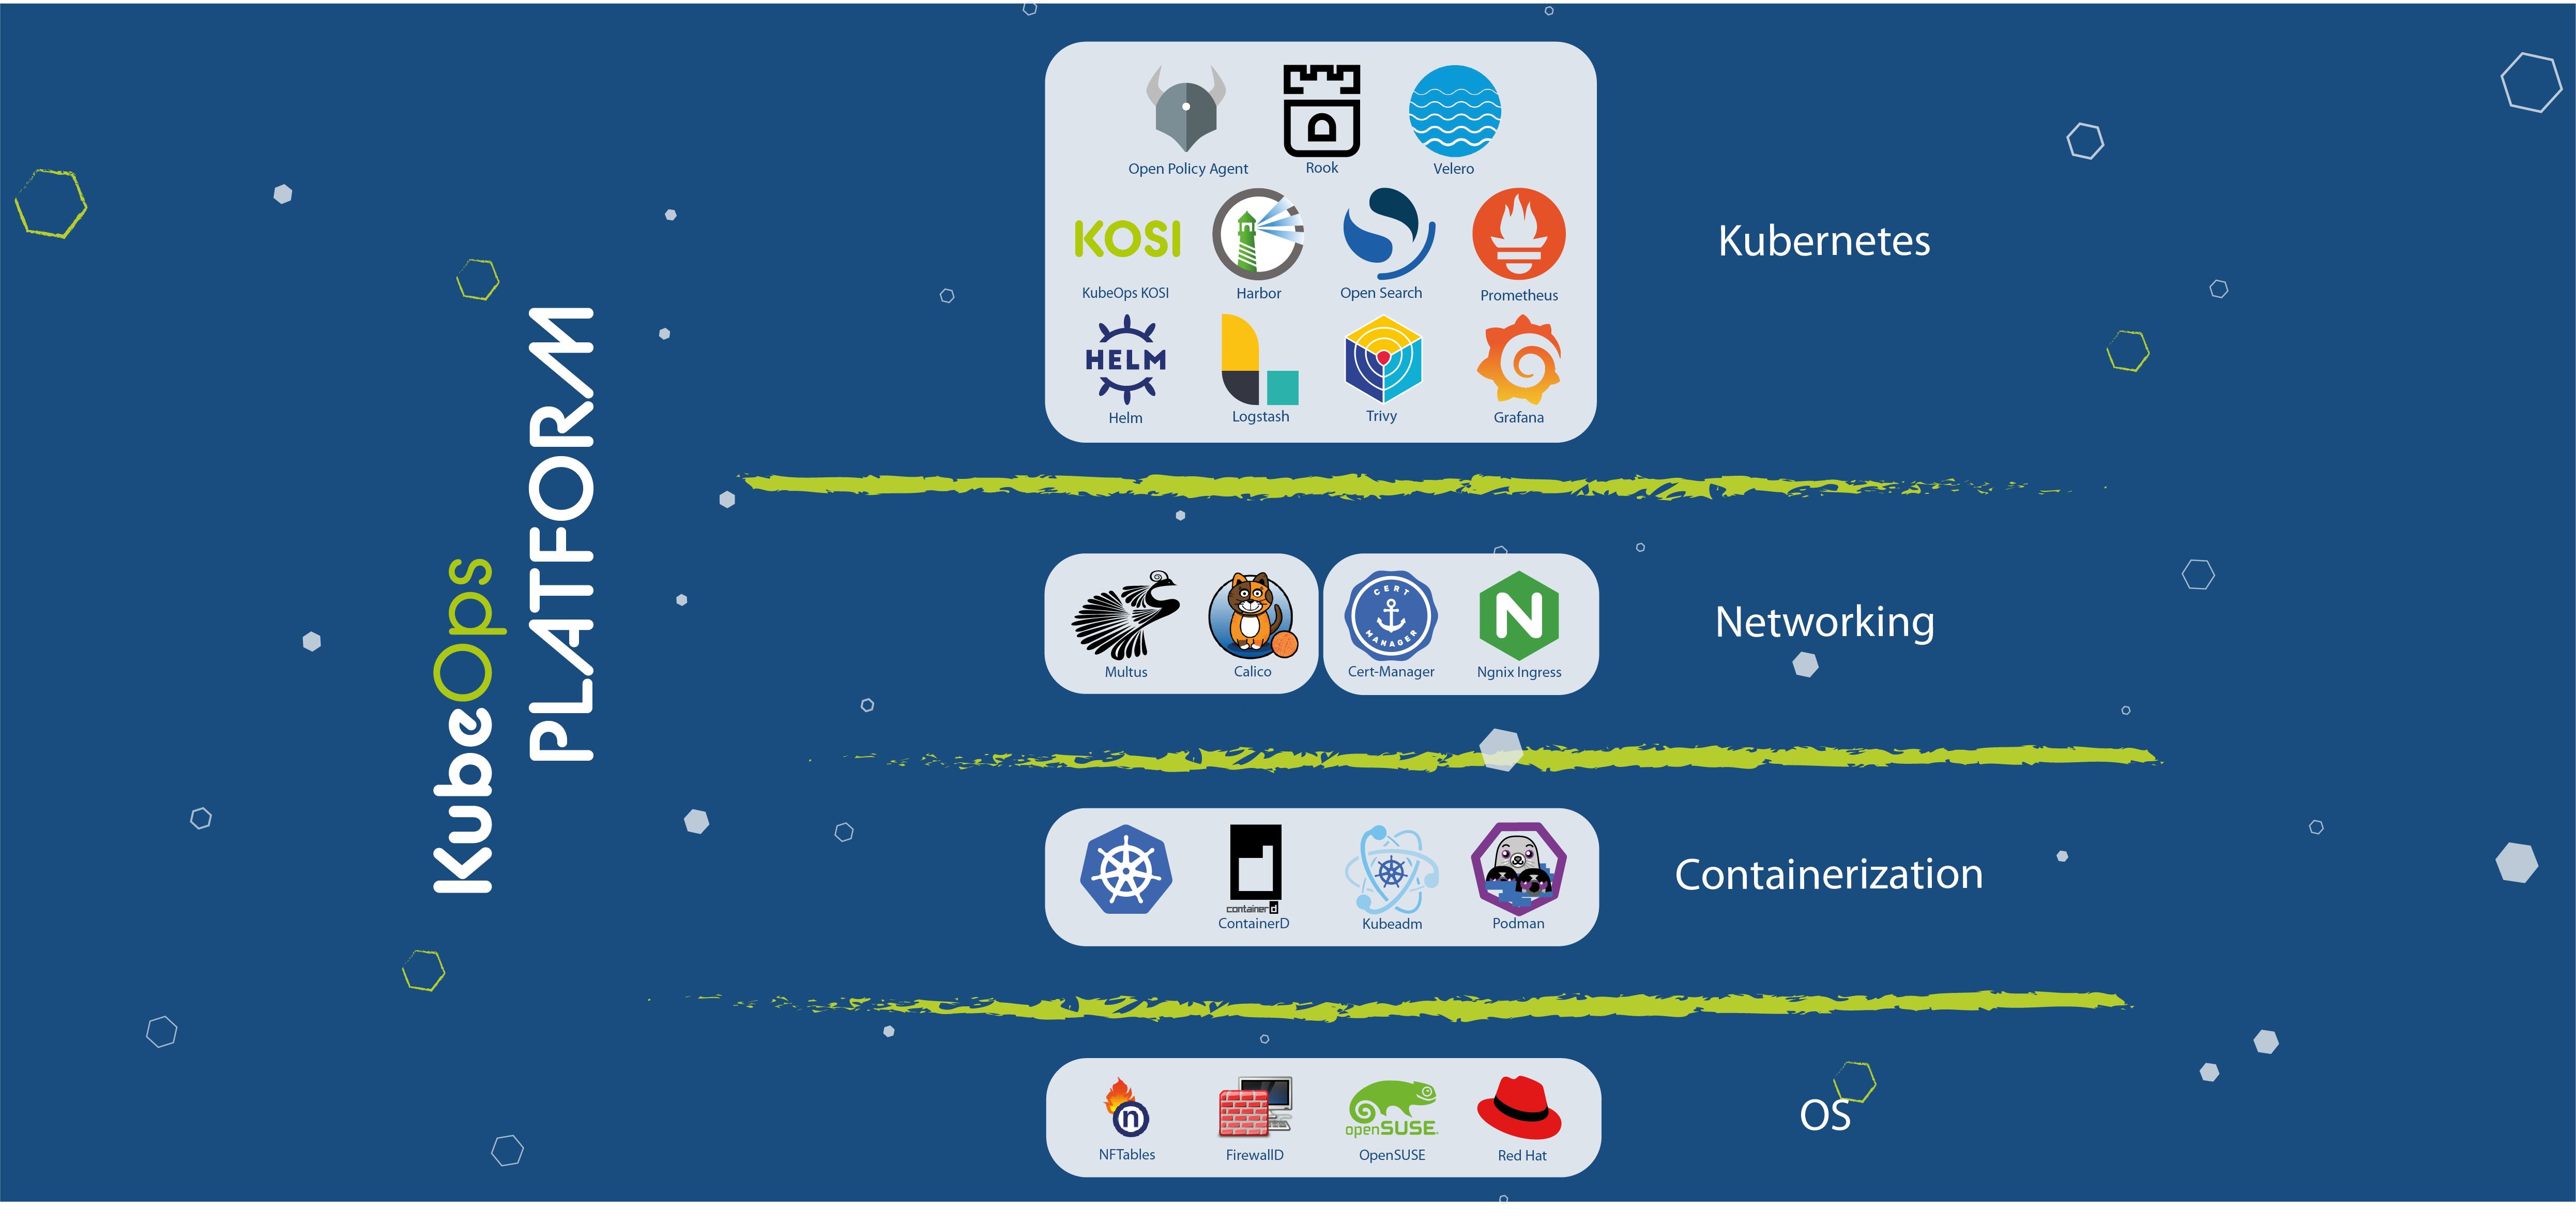 The image is a diagram of the "KubeOps Platform" featuring a collection of logos representing various technologies and tools categorized under "Kubernetes", "Networking", "Containerization", and "OS" (Operating System). Each category is delineated by its own row with a colored stripe background where the logos of corresponding tools are placed. The logos symbolize a range of open-source projects and products commonly used in Kubernetes ecosystems, such as Helm, Grafana, Calico, Containerd, and operating systems like openSUSE and Red Hat. The layout is clean, set against a dark blue background with subtle graphic elements that might suggest a digital network or data structure.